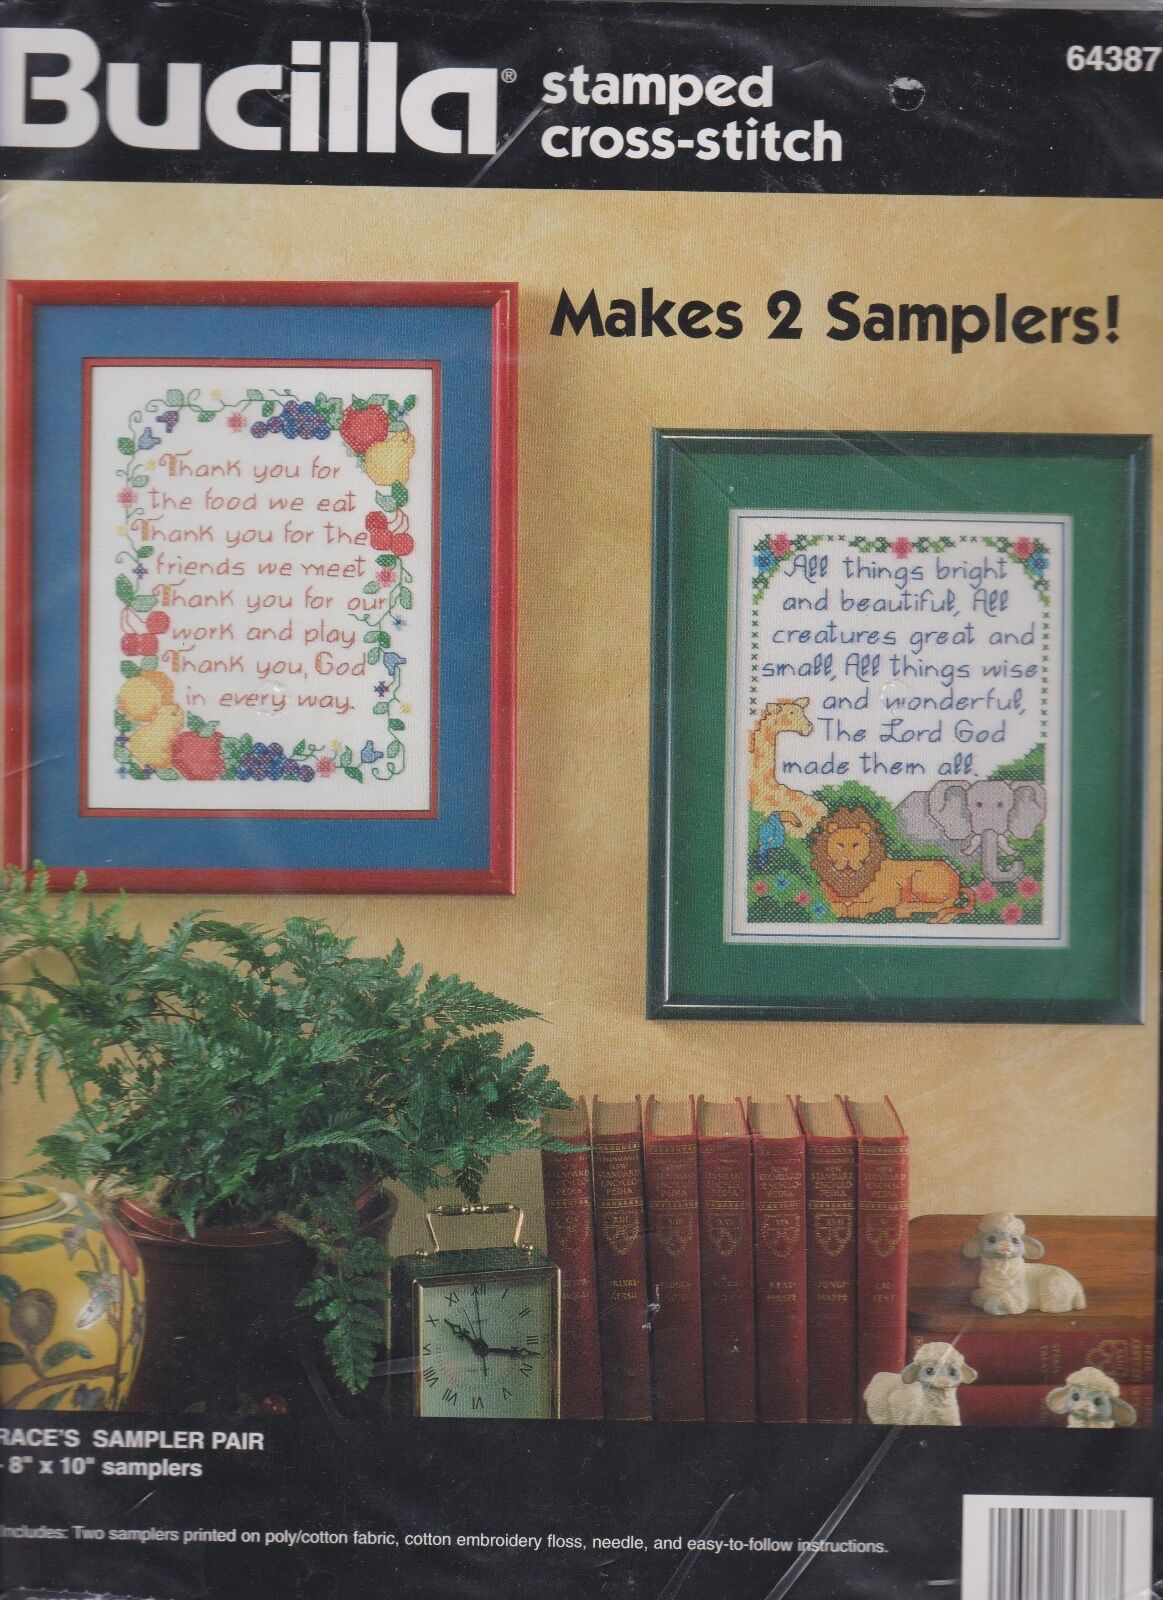 DIY Graces Sampler Pair Stamped Counted Cross Stitch Kit